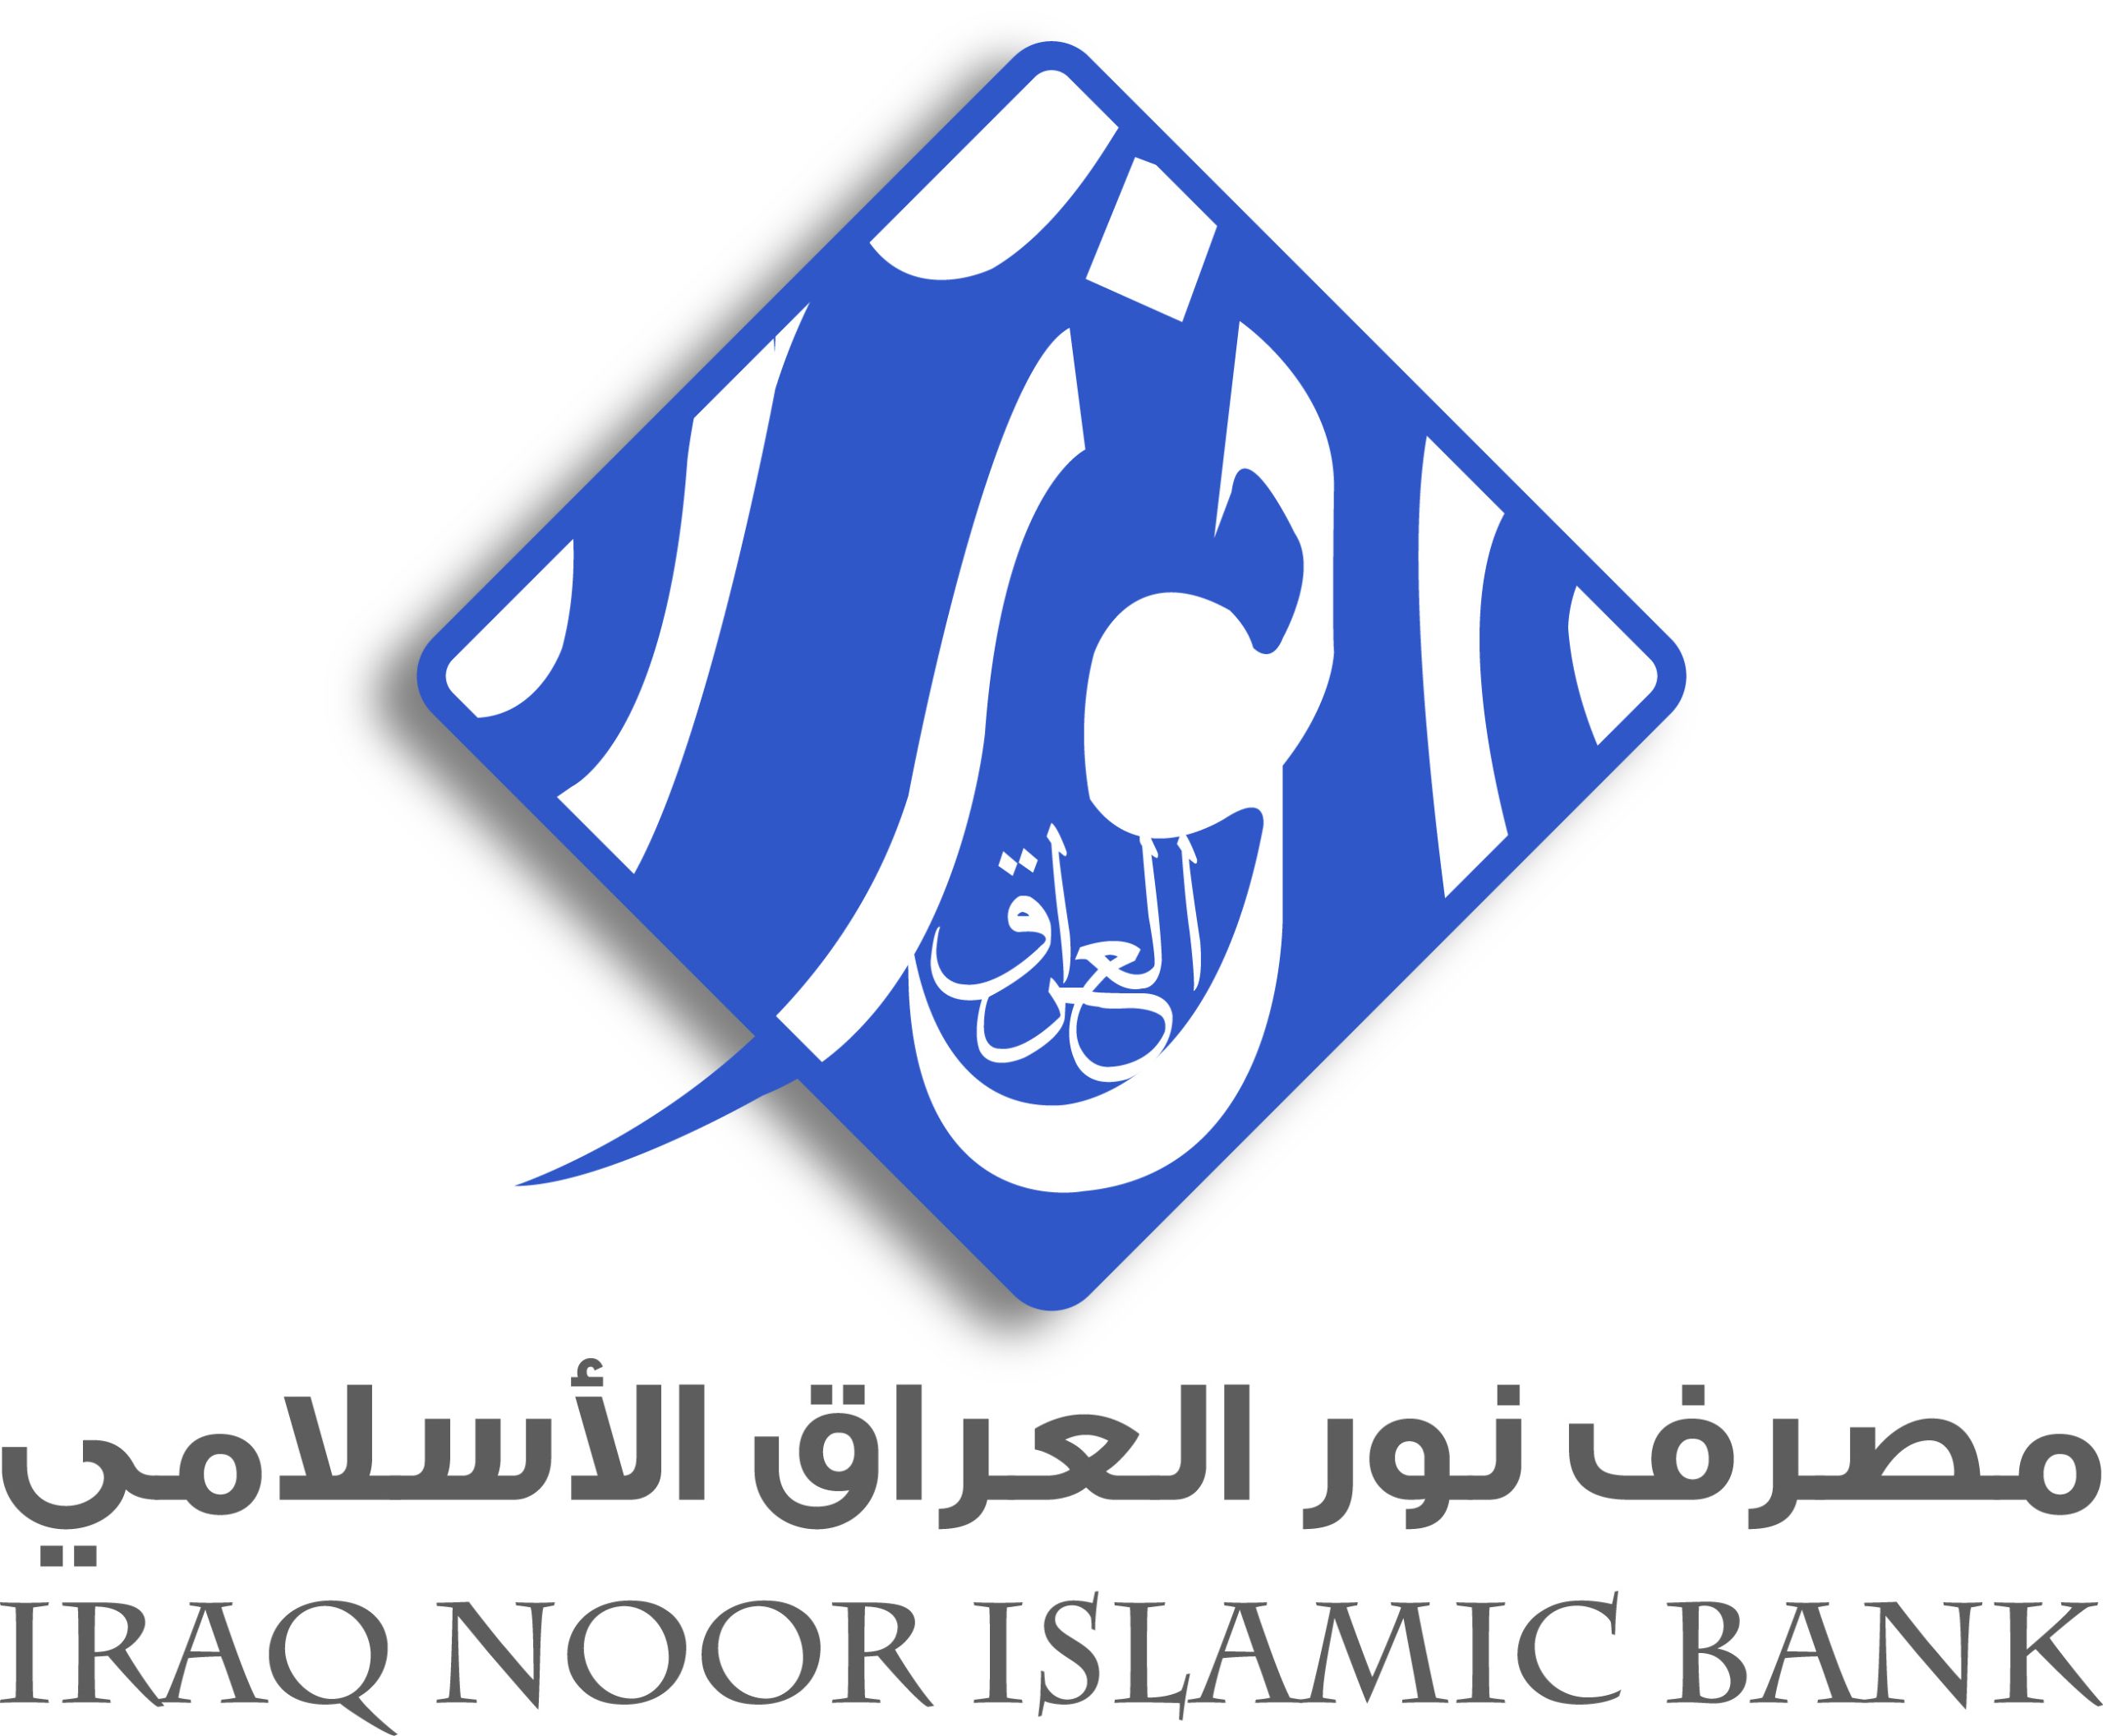 You are currently viewing Iraq Noor Islamic Bank for Investment